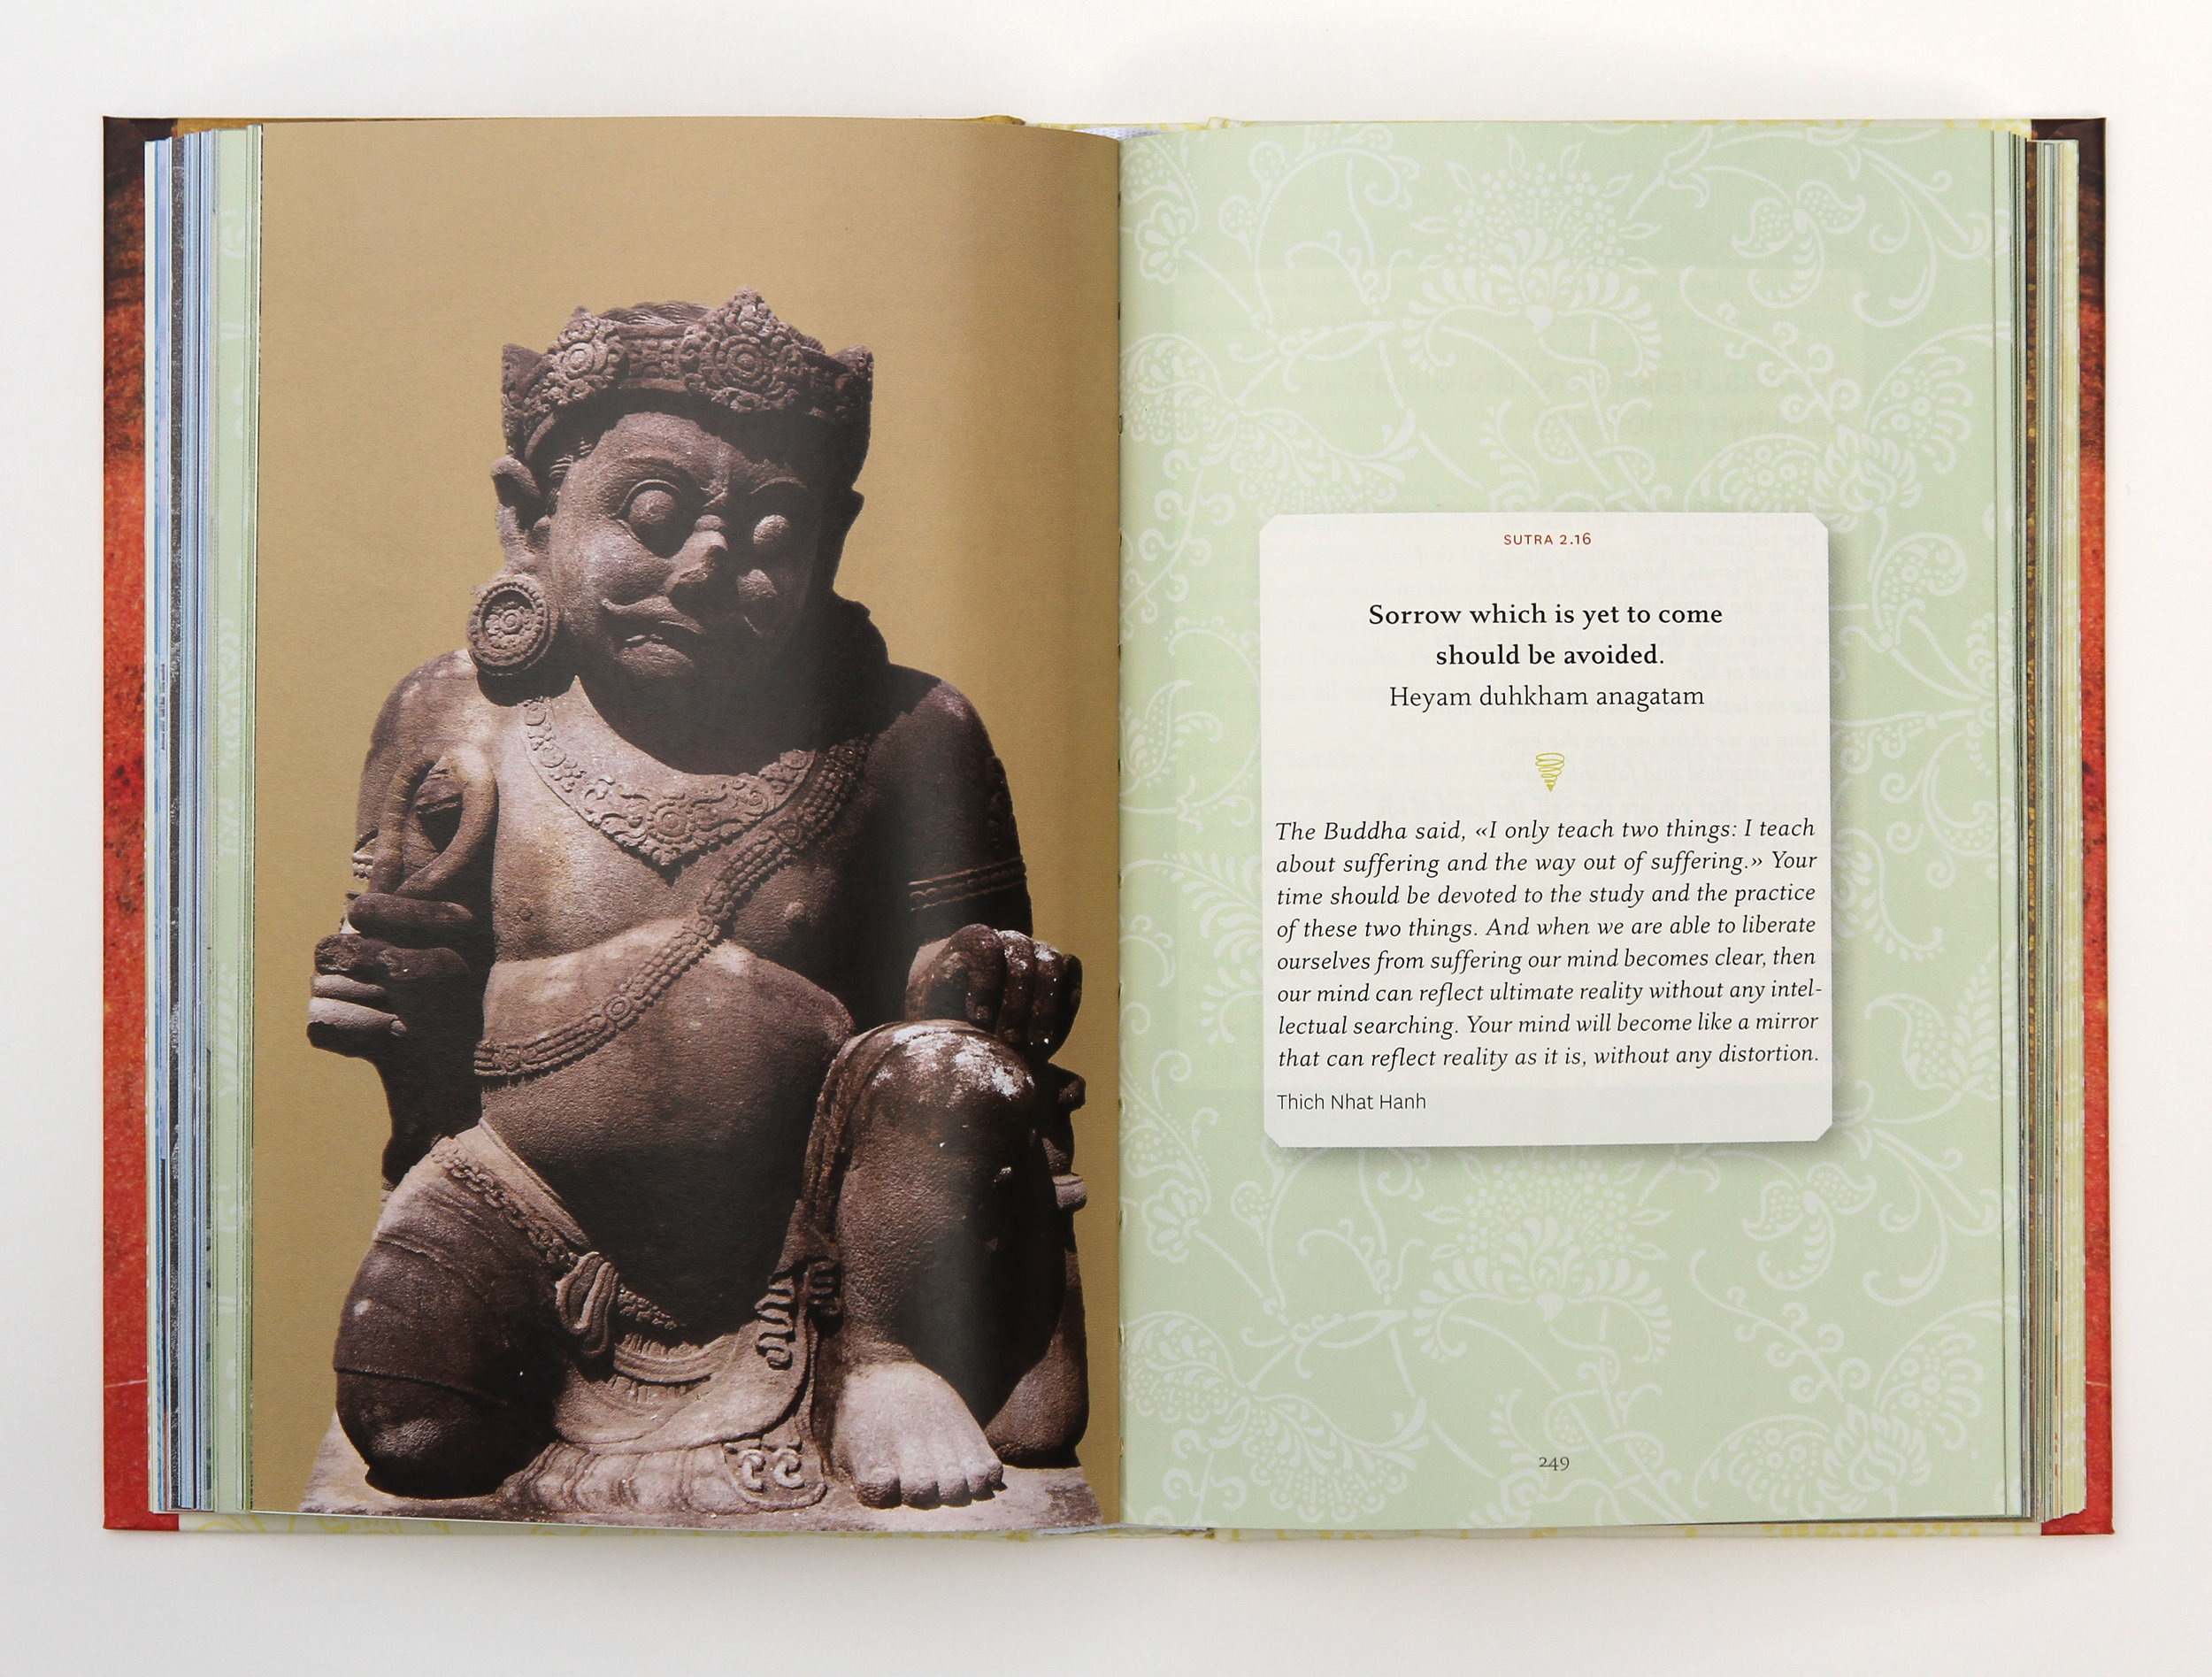 yoga_sutras_spreads_layered_cropped_3.jpg